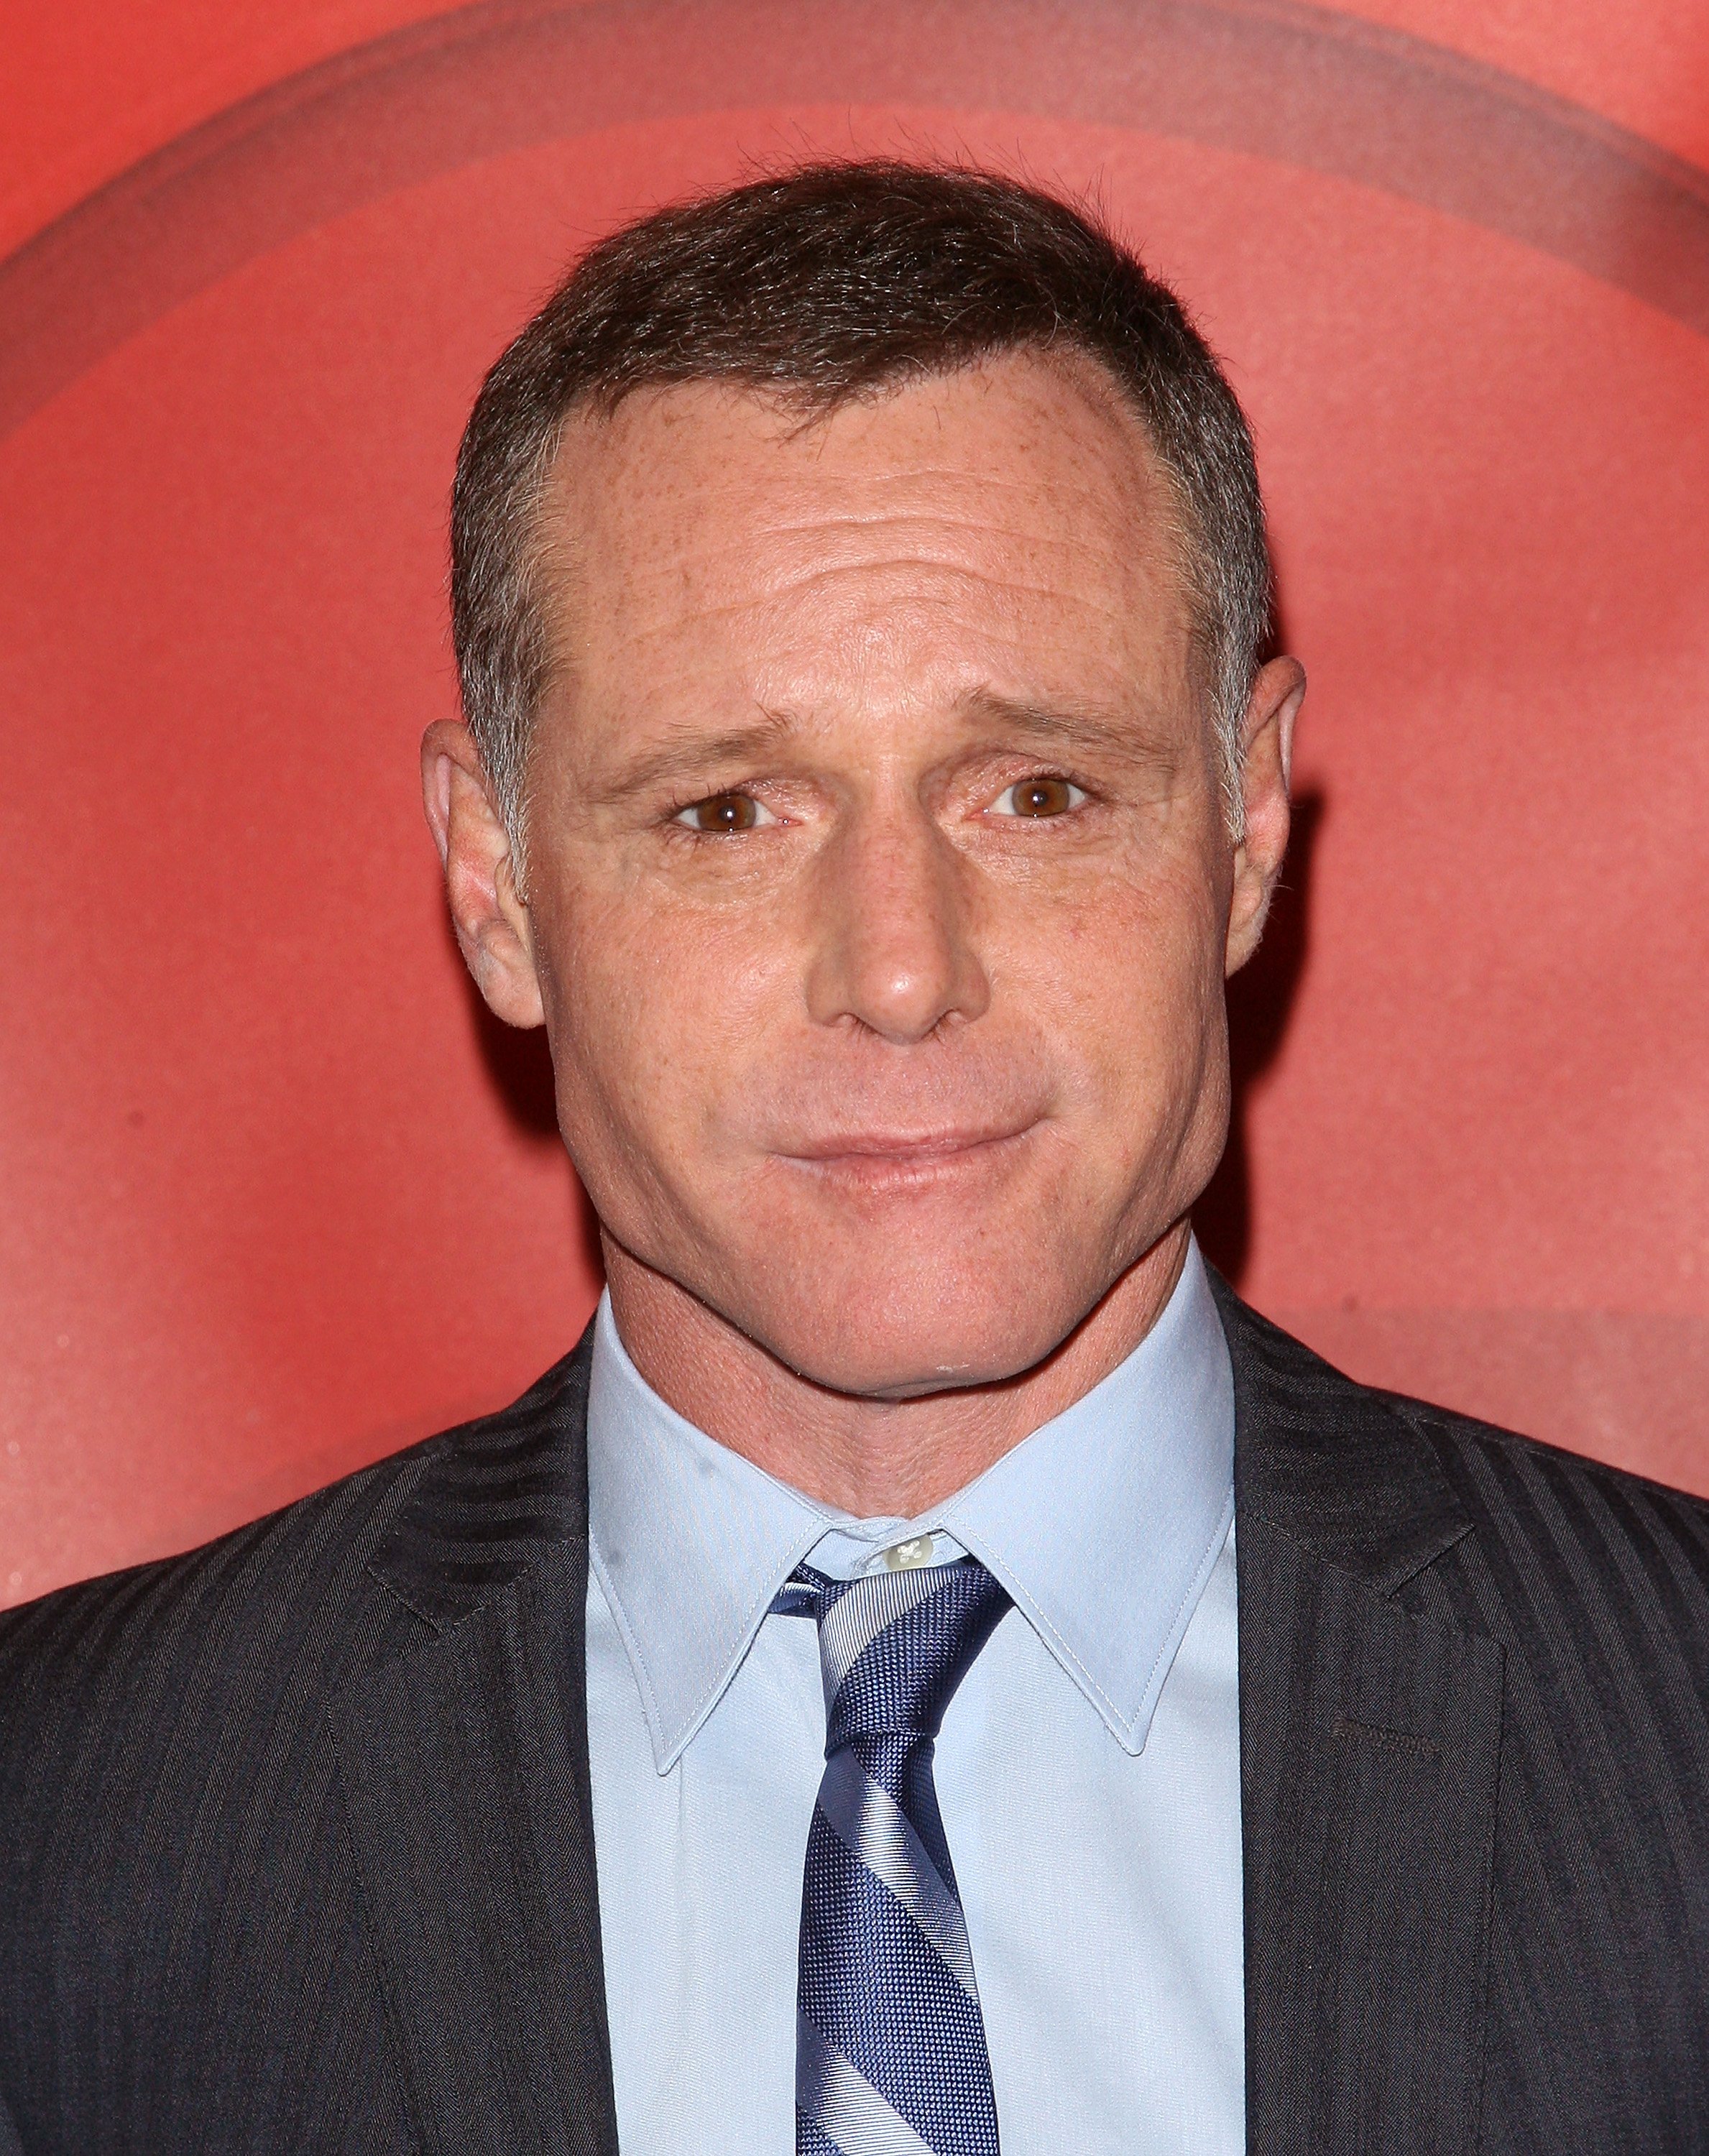 Jason Beghe at Radio City Music Hall in New York City on May 13, 2013 | Source: Getty Images